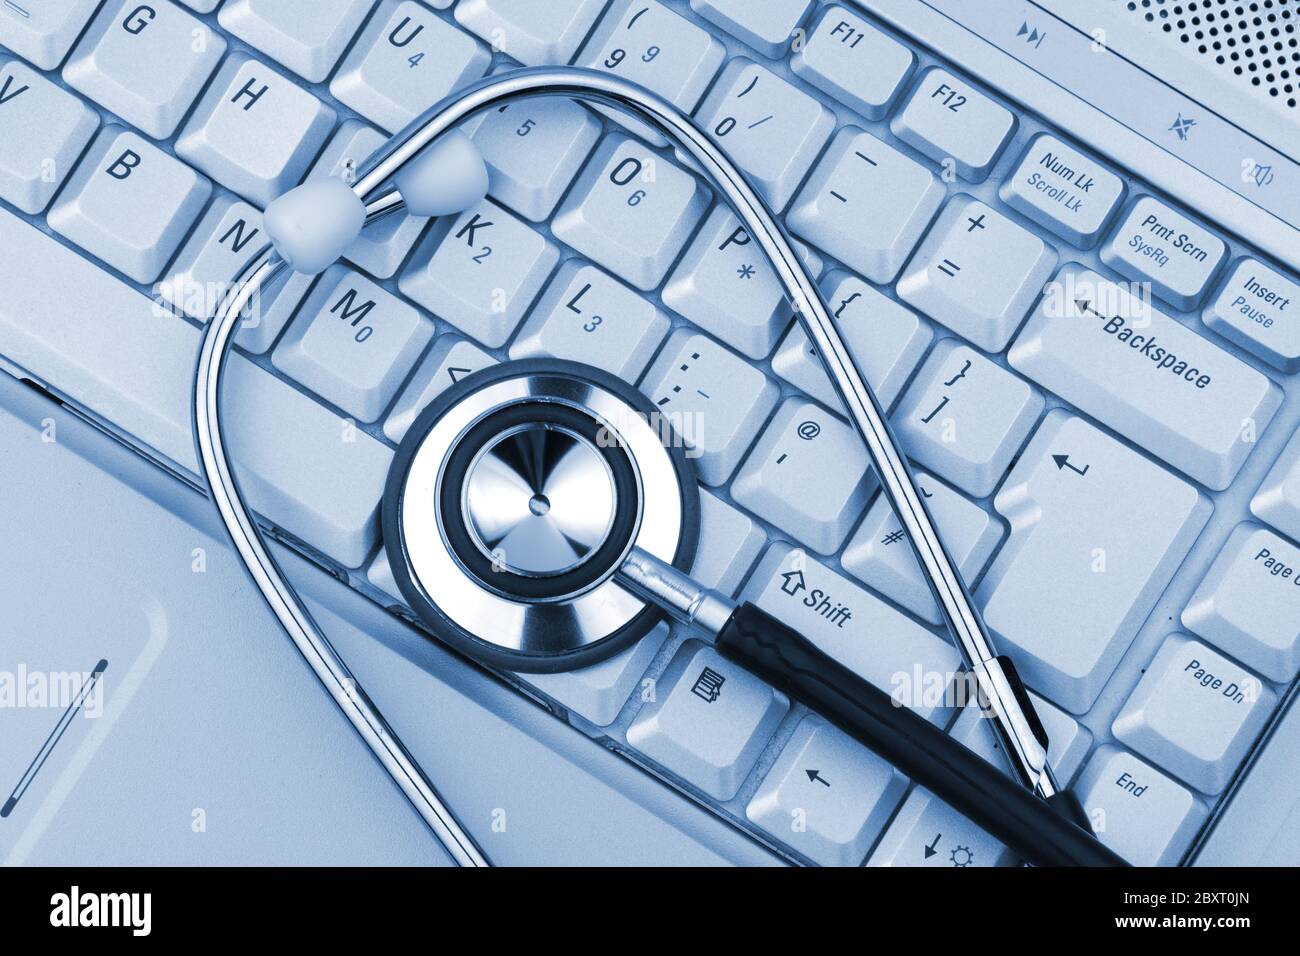 PC and stethoscope in clinical blue light Stock Photo